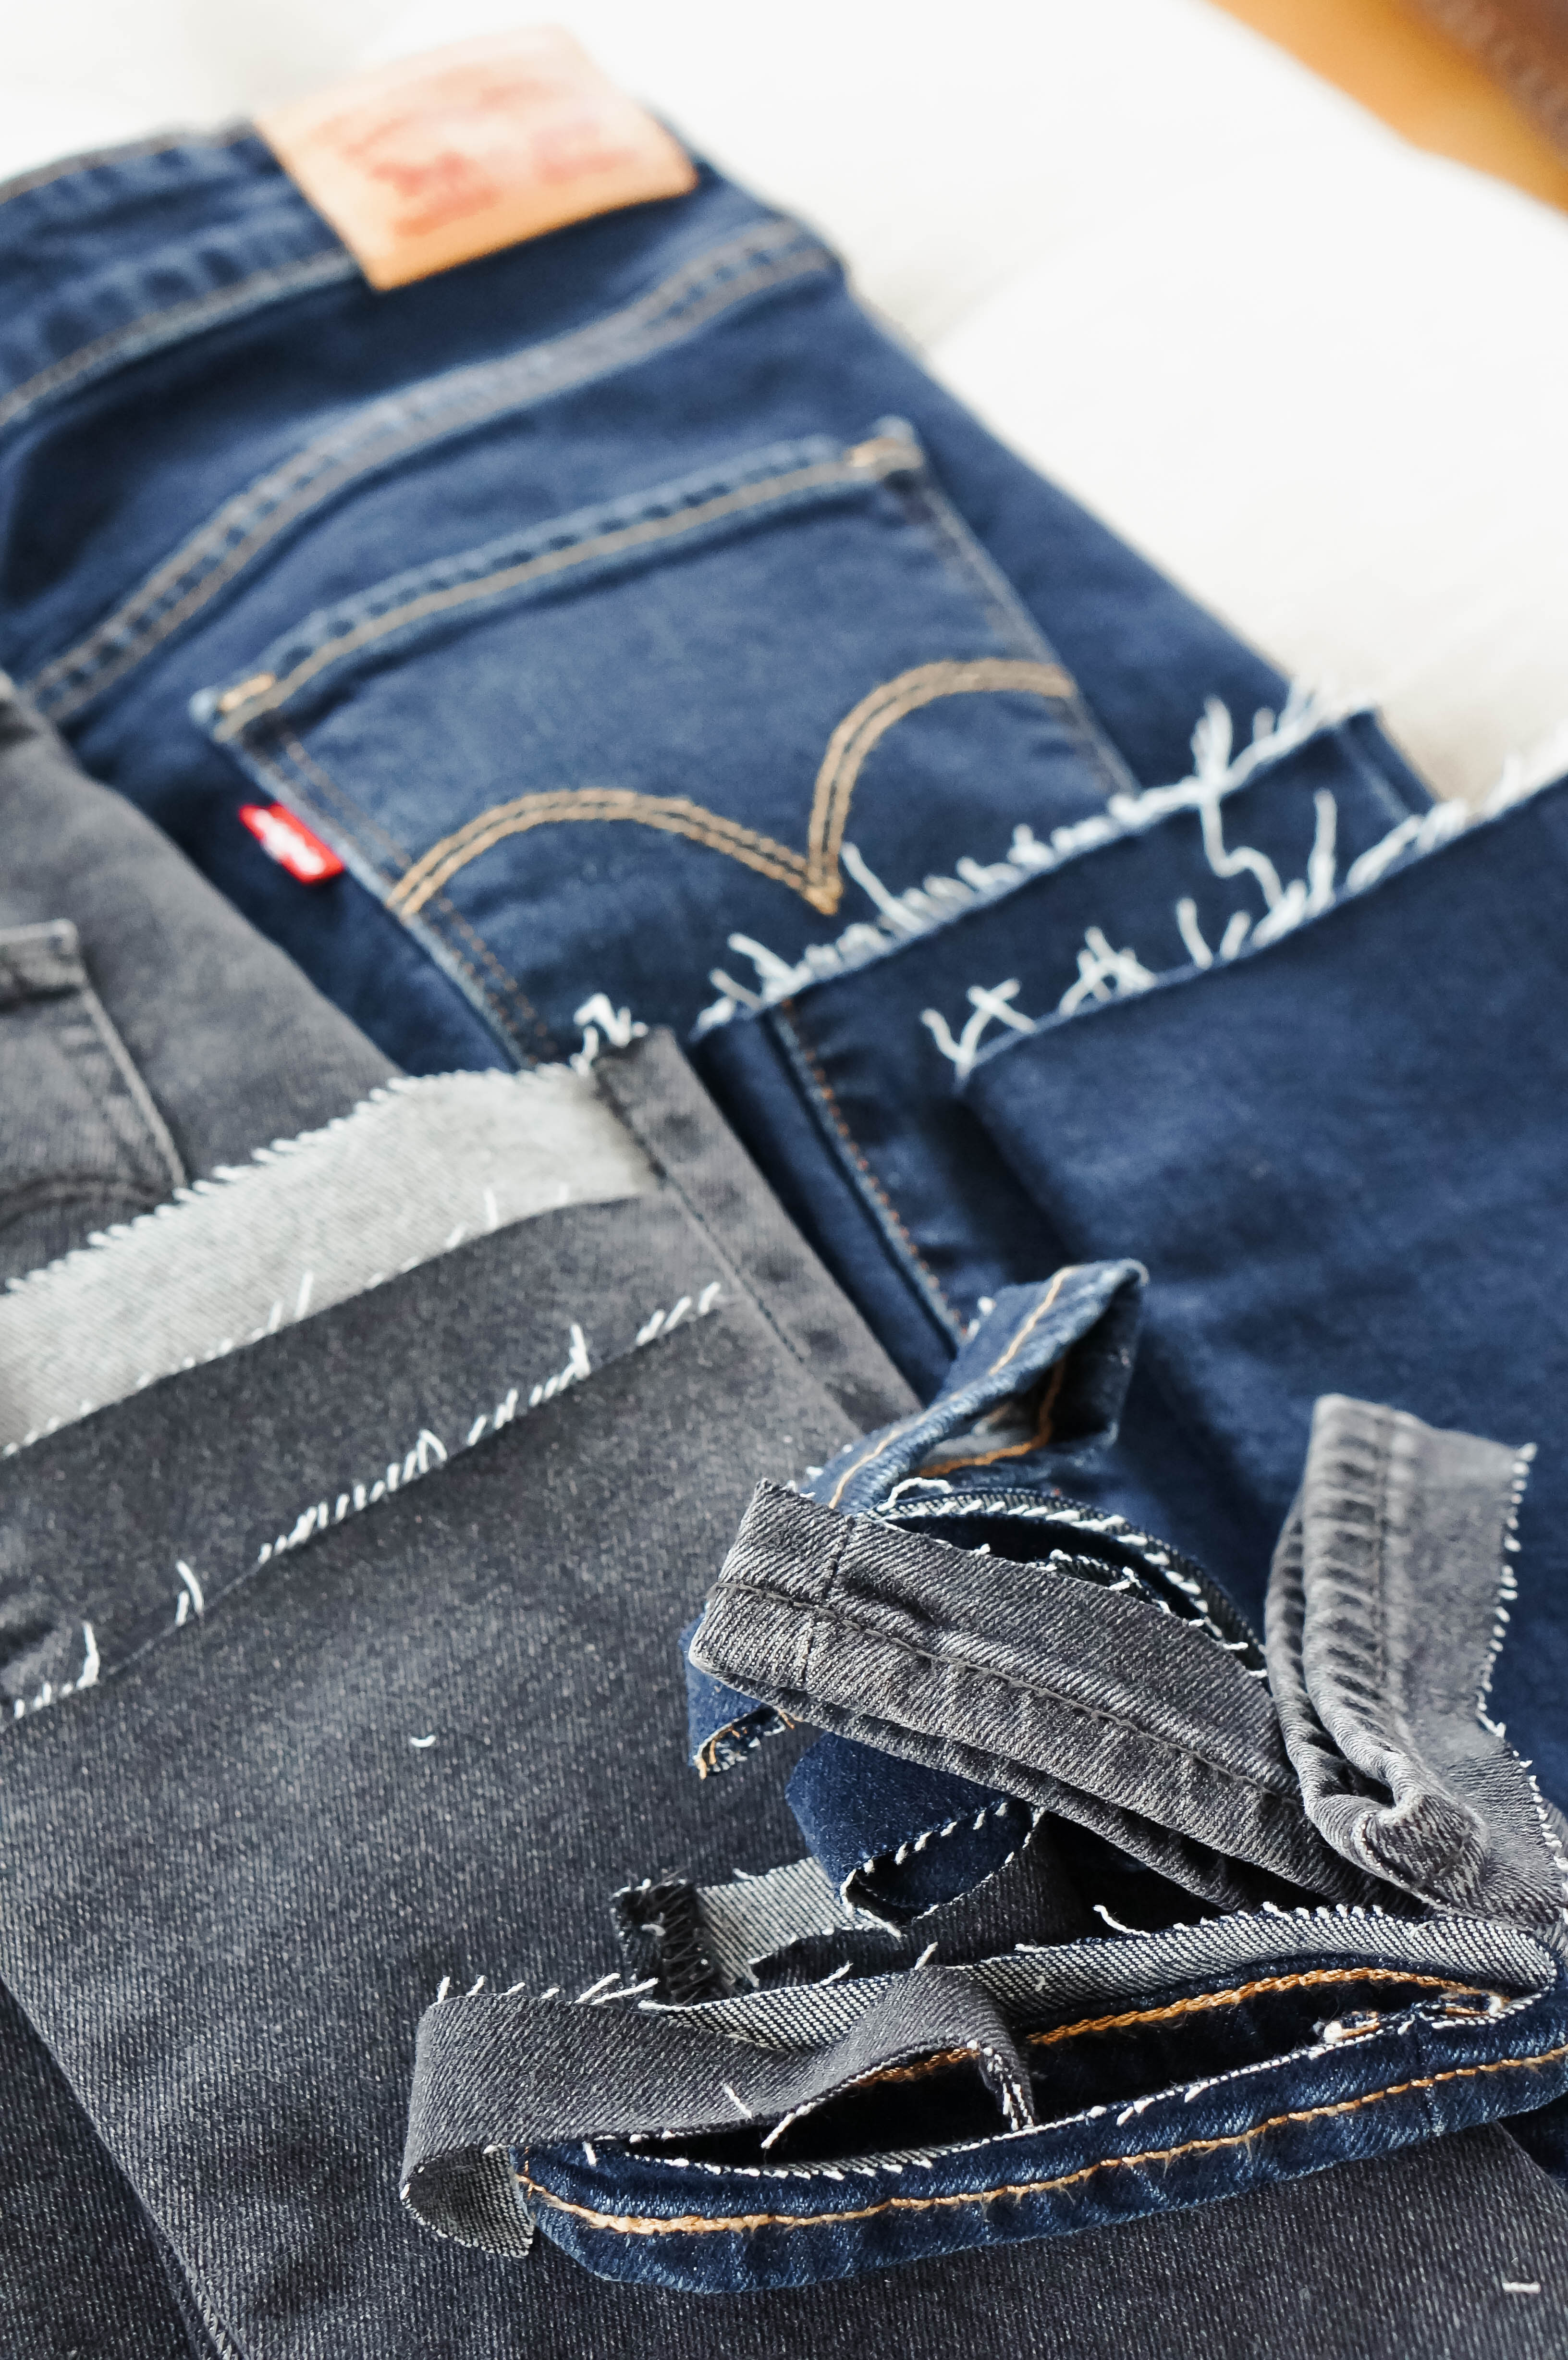 The Raw Frayed Hem Jeans Trend For Men - THE JEANS BLOG